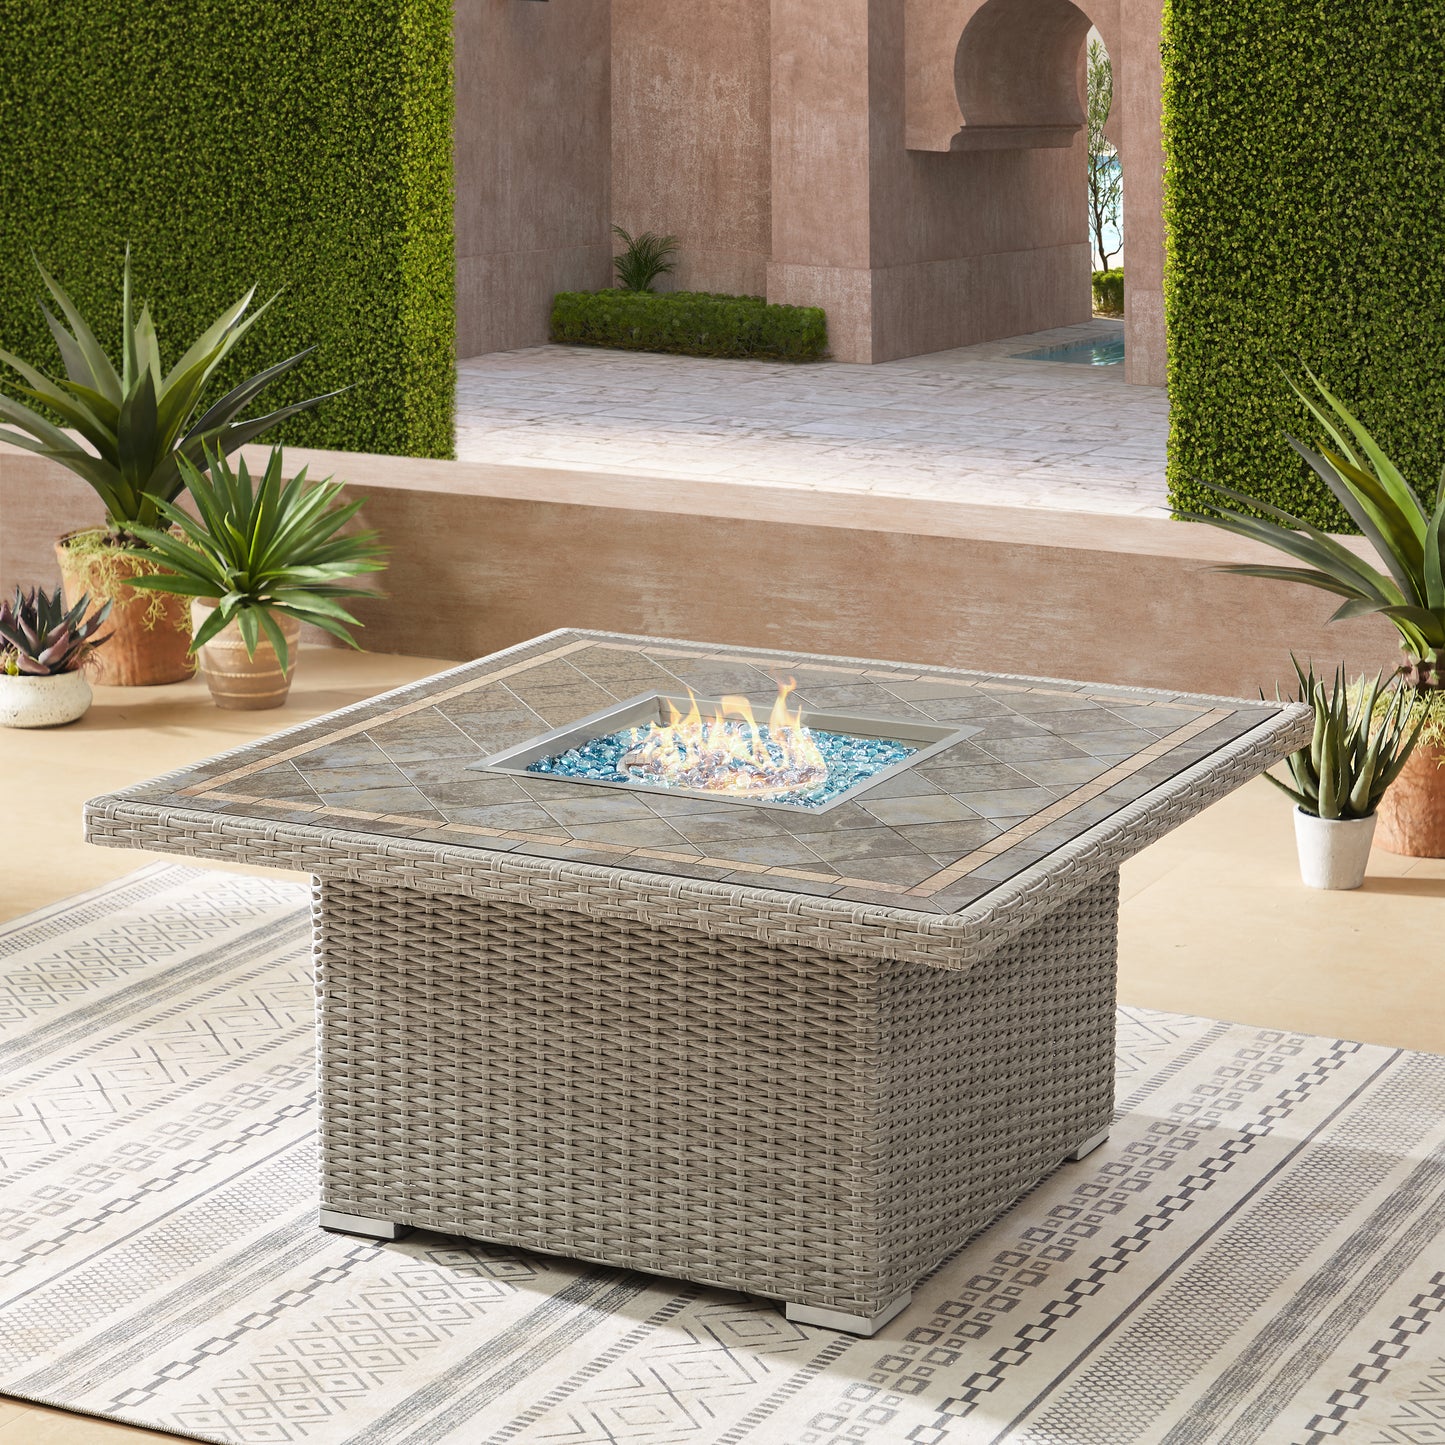 Niko Aluminum Propane Outdoor Fire Pit Table with Lid